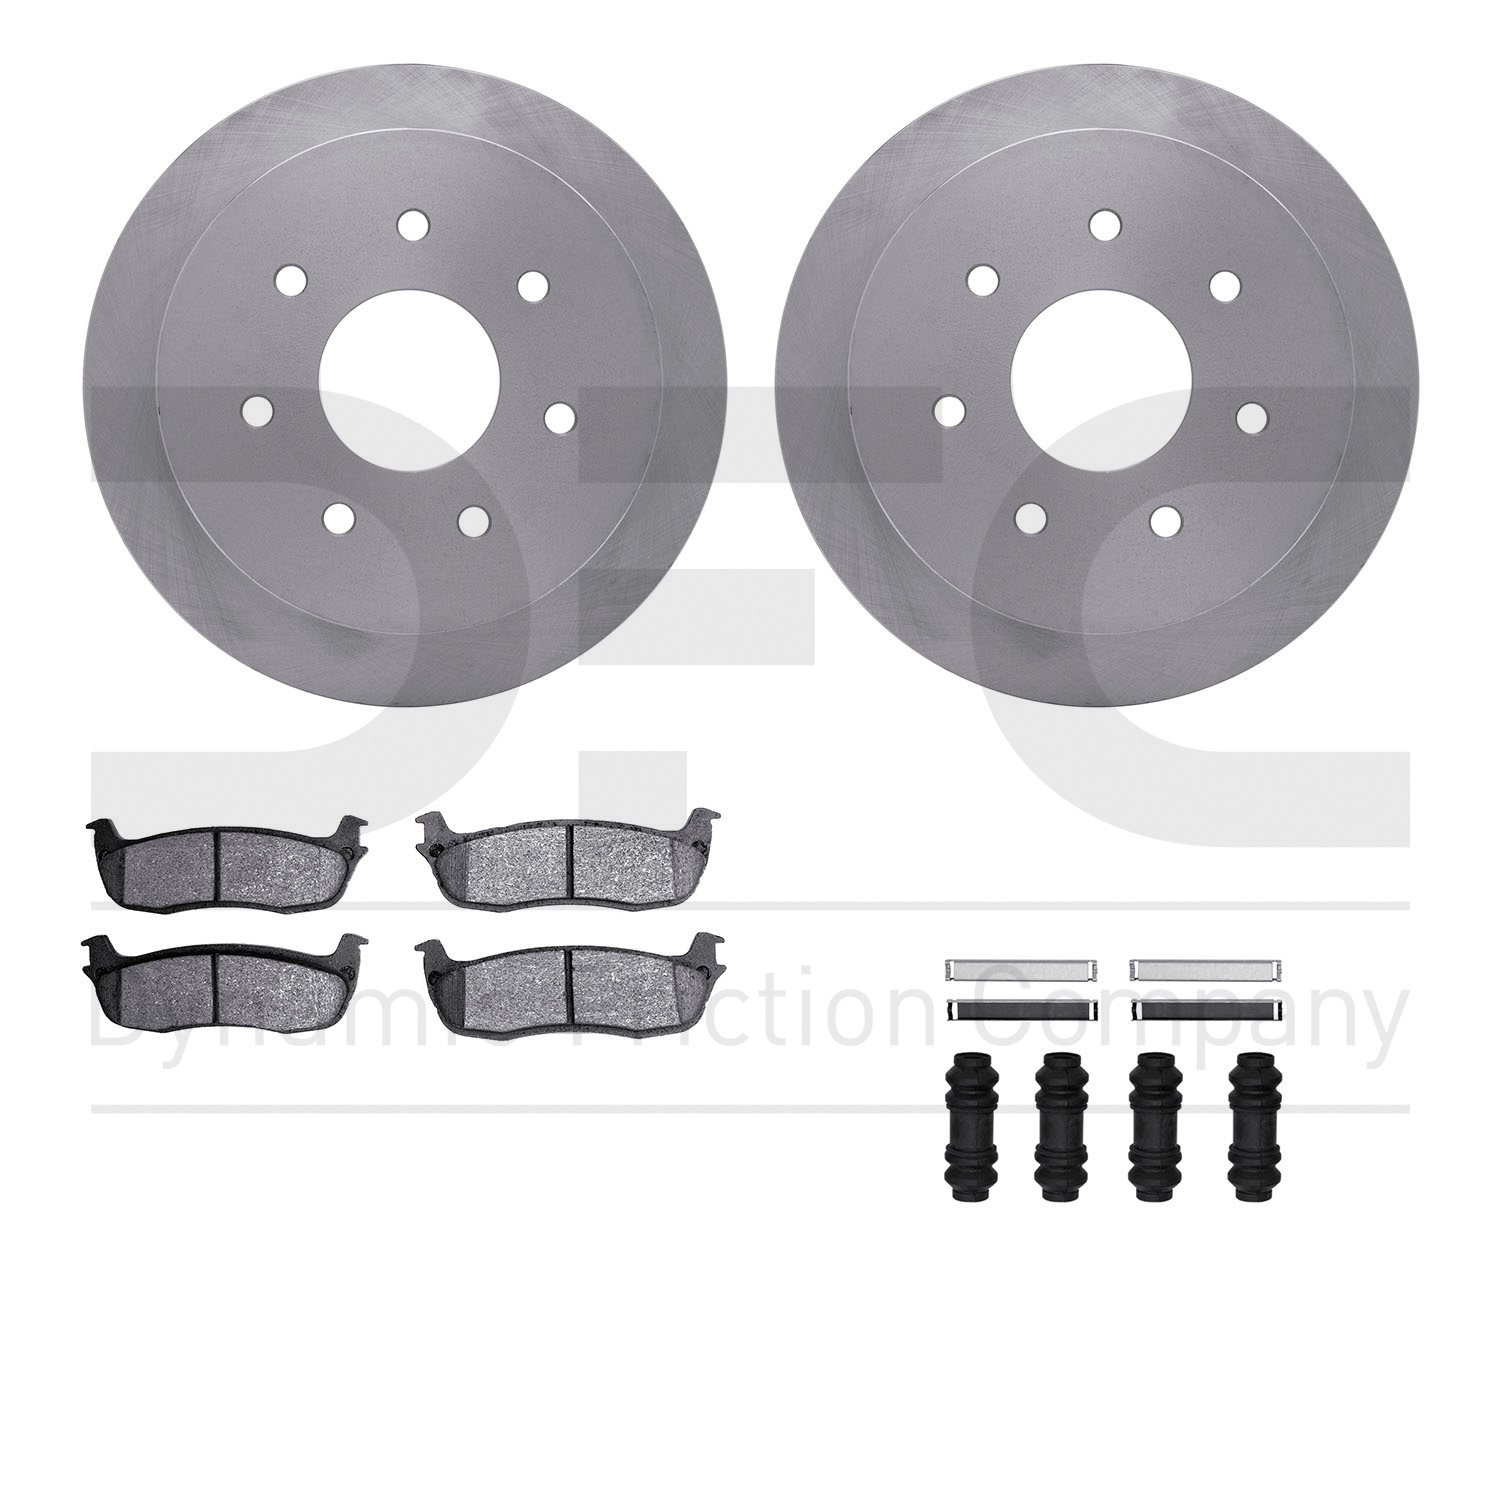 6412-54107 Brake Rotors with Ultimate-Duty Brake Pads Kit & Hardware, 1997-2004 Ford/Lincoln/Mercury/Mazda, Position: Rear